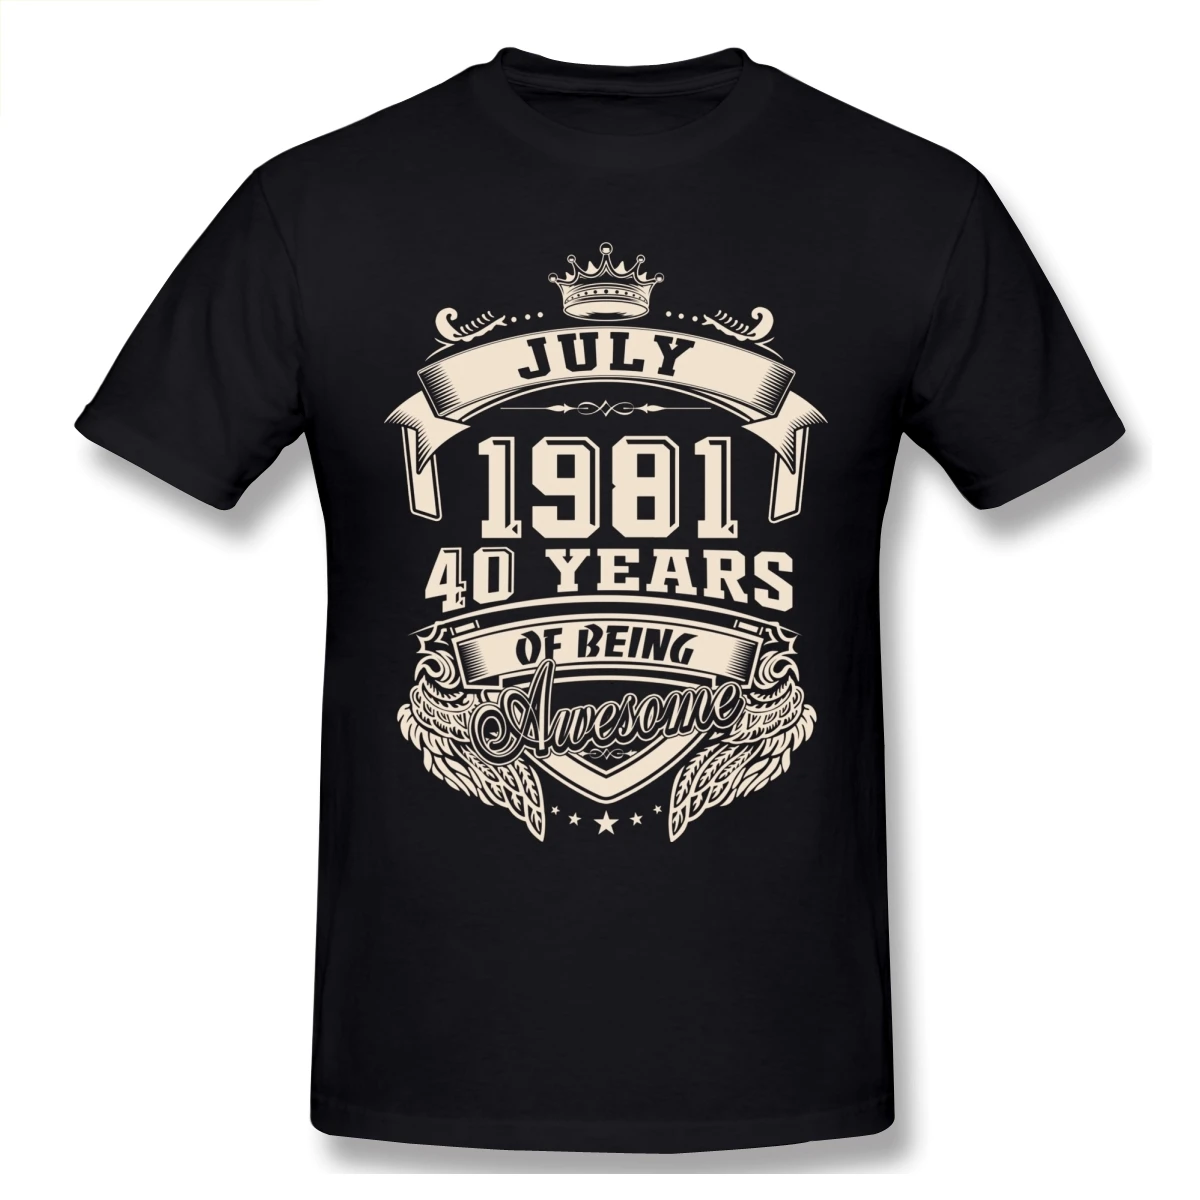 

Born In July 1981 40 Years Of Being Awesome T Shirt Big Size Cotton Crewneck Custom Short Sleeve Men Clothing